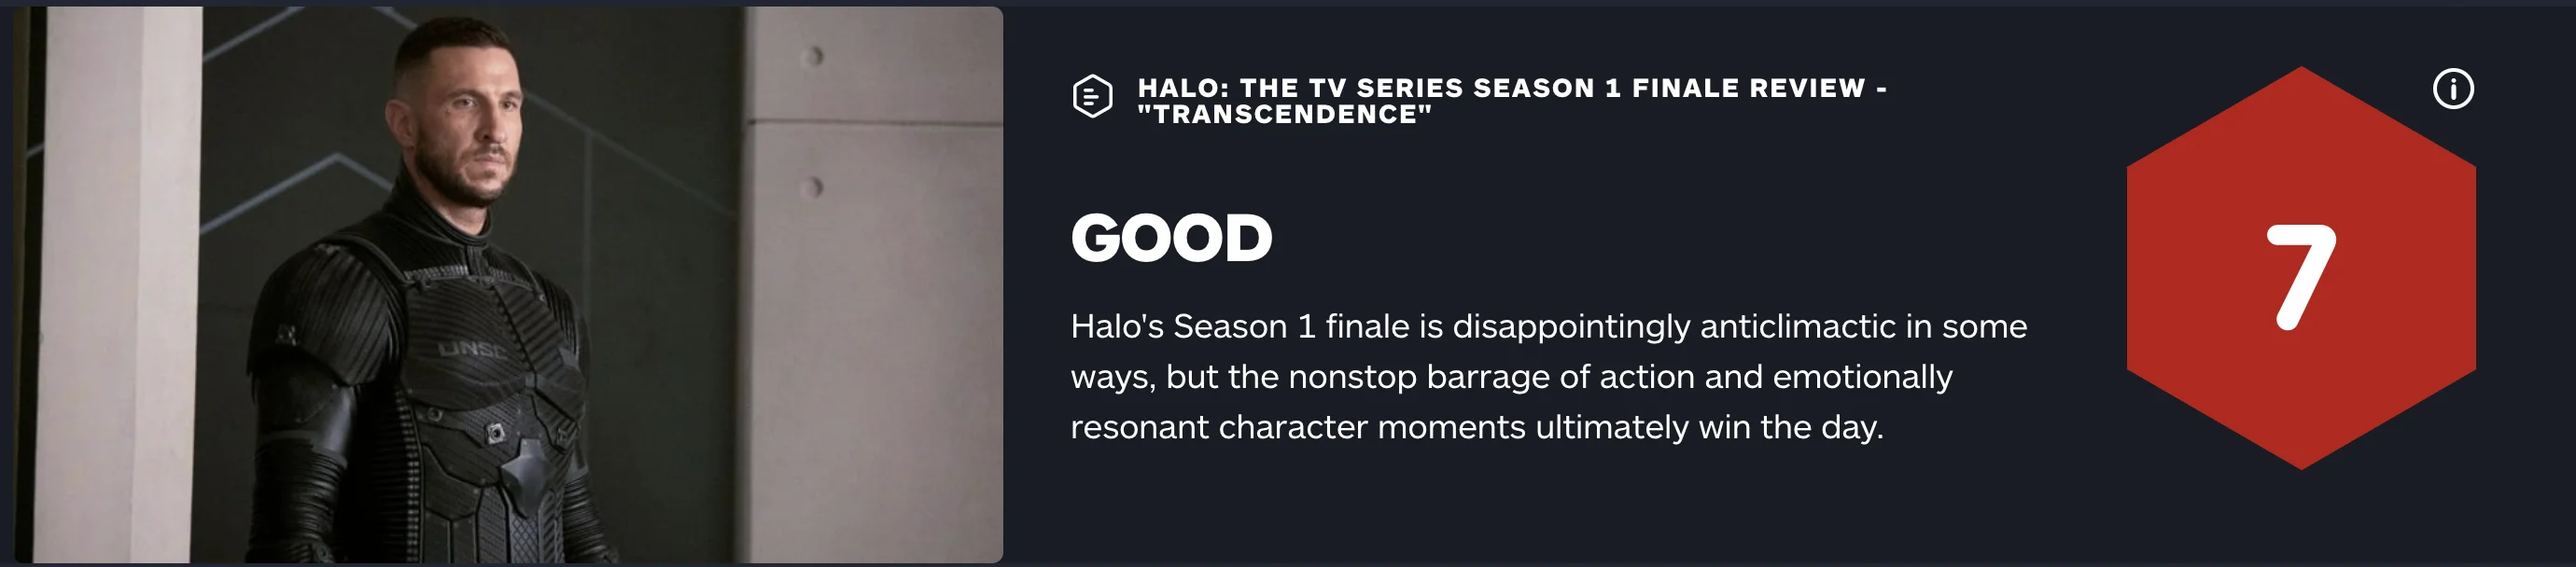 Halo Season 1 IGN 7 points: Disappointing ending, but character success